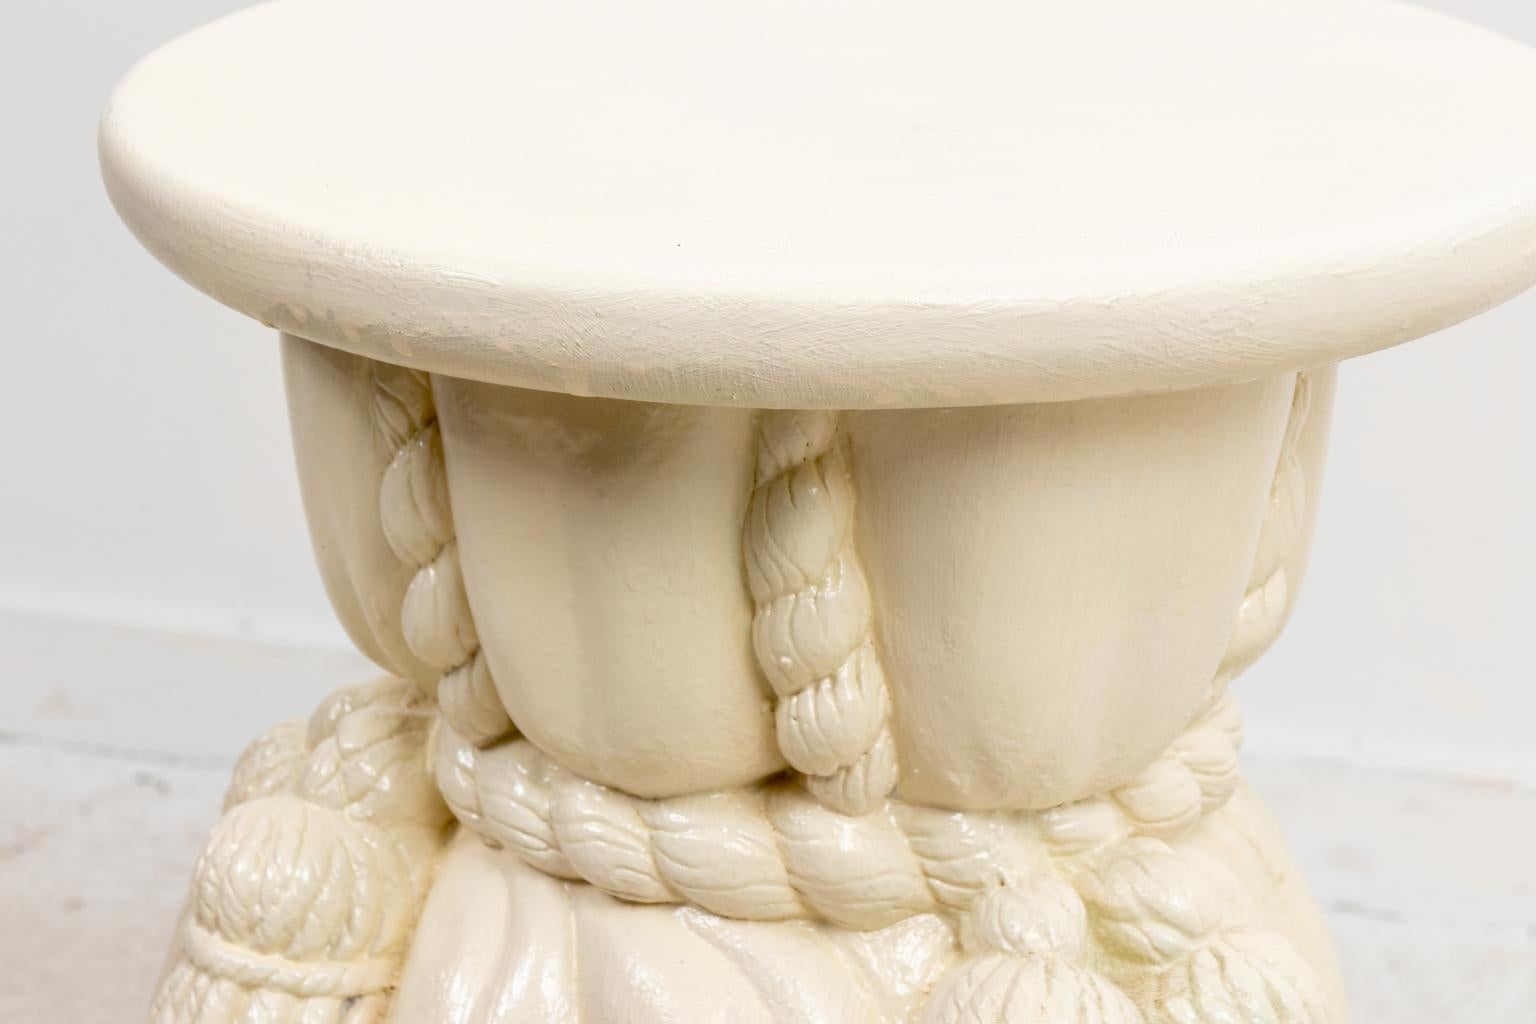 Circa 1990s draped plaster painted stool in the Hollywood Regency style with tassels. Please note of wear consistent with age.